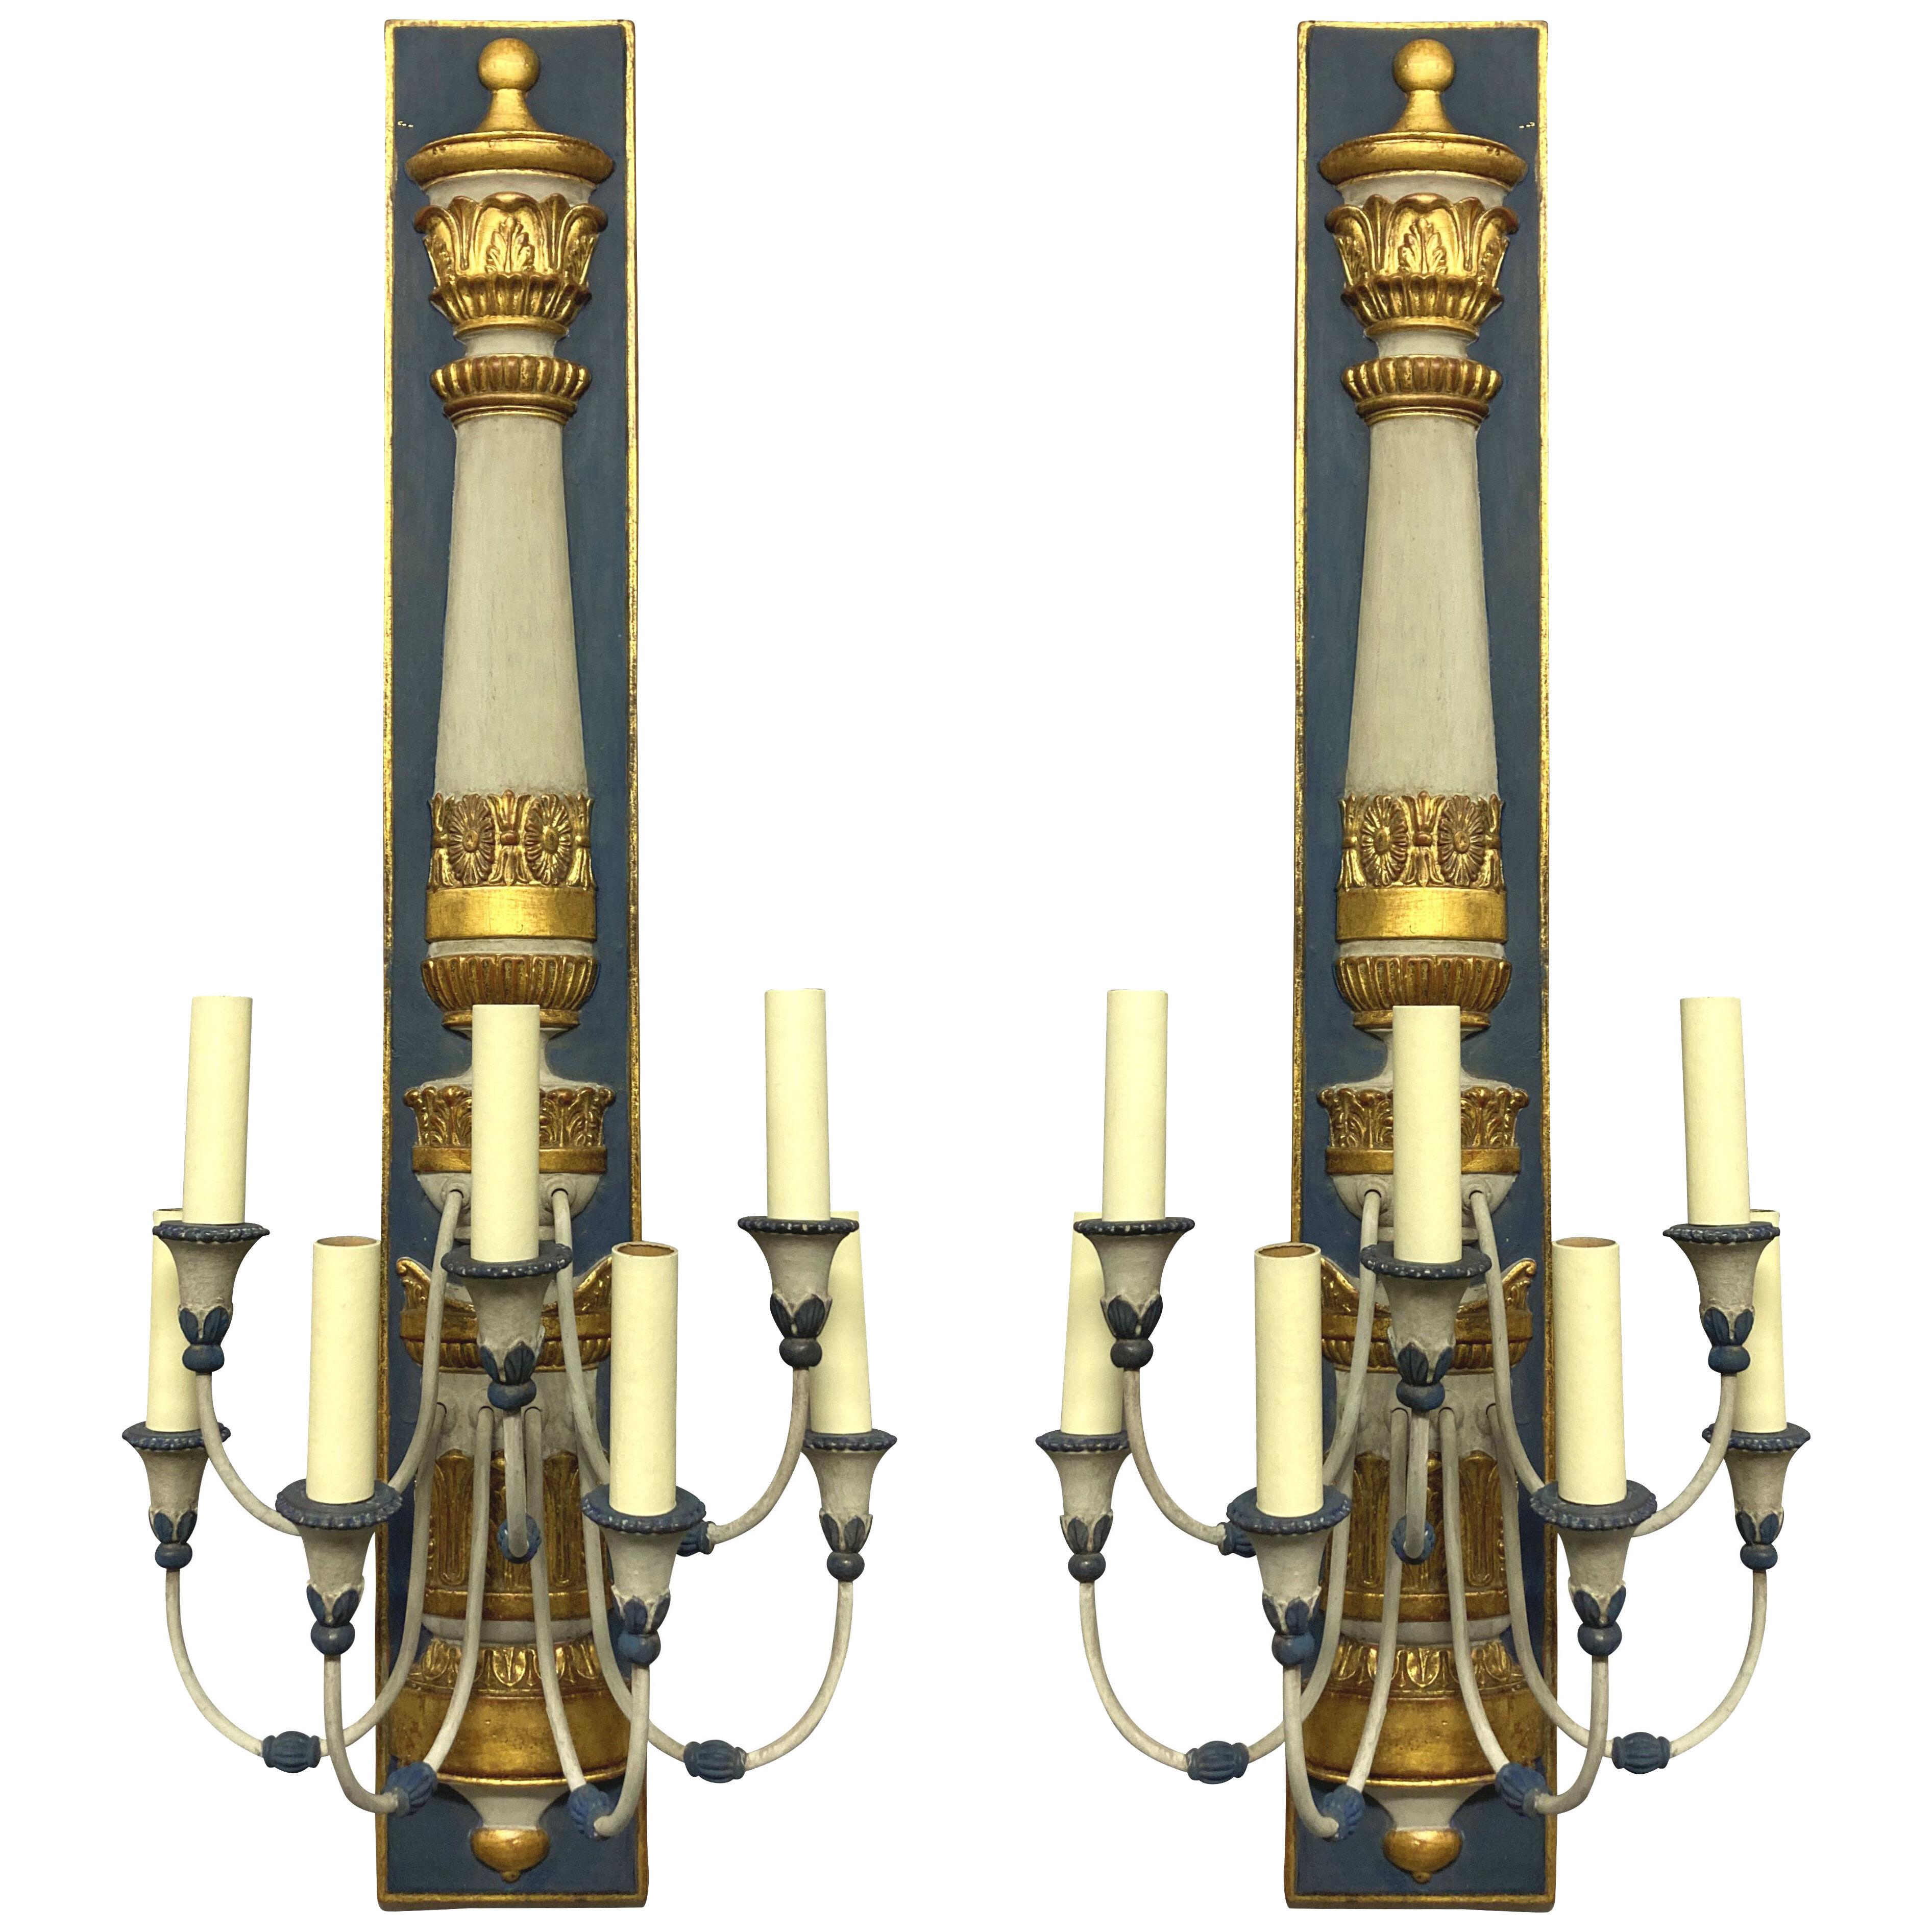 A PAIR OF LARGE EGYPTIAN REVIVAL WALL LIGHTS